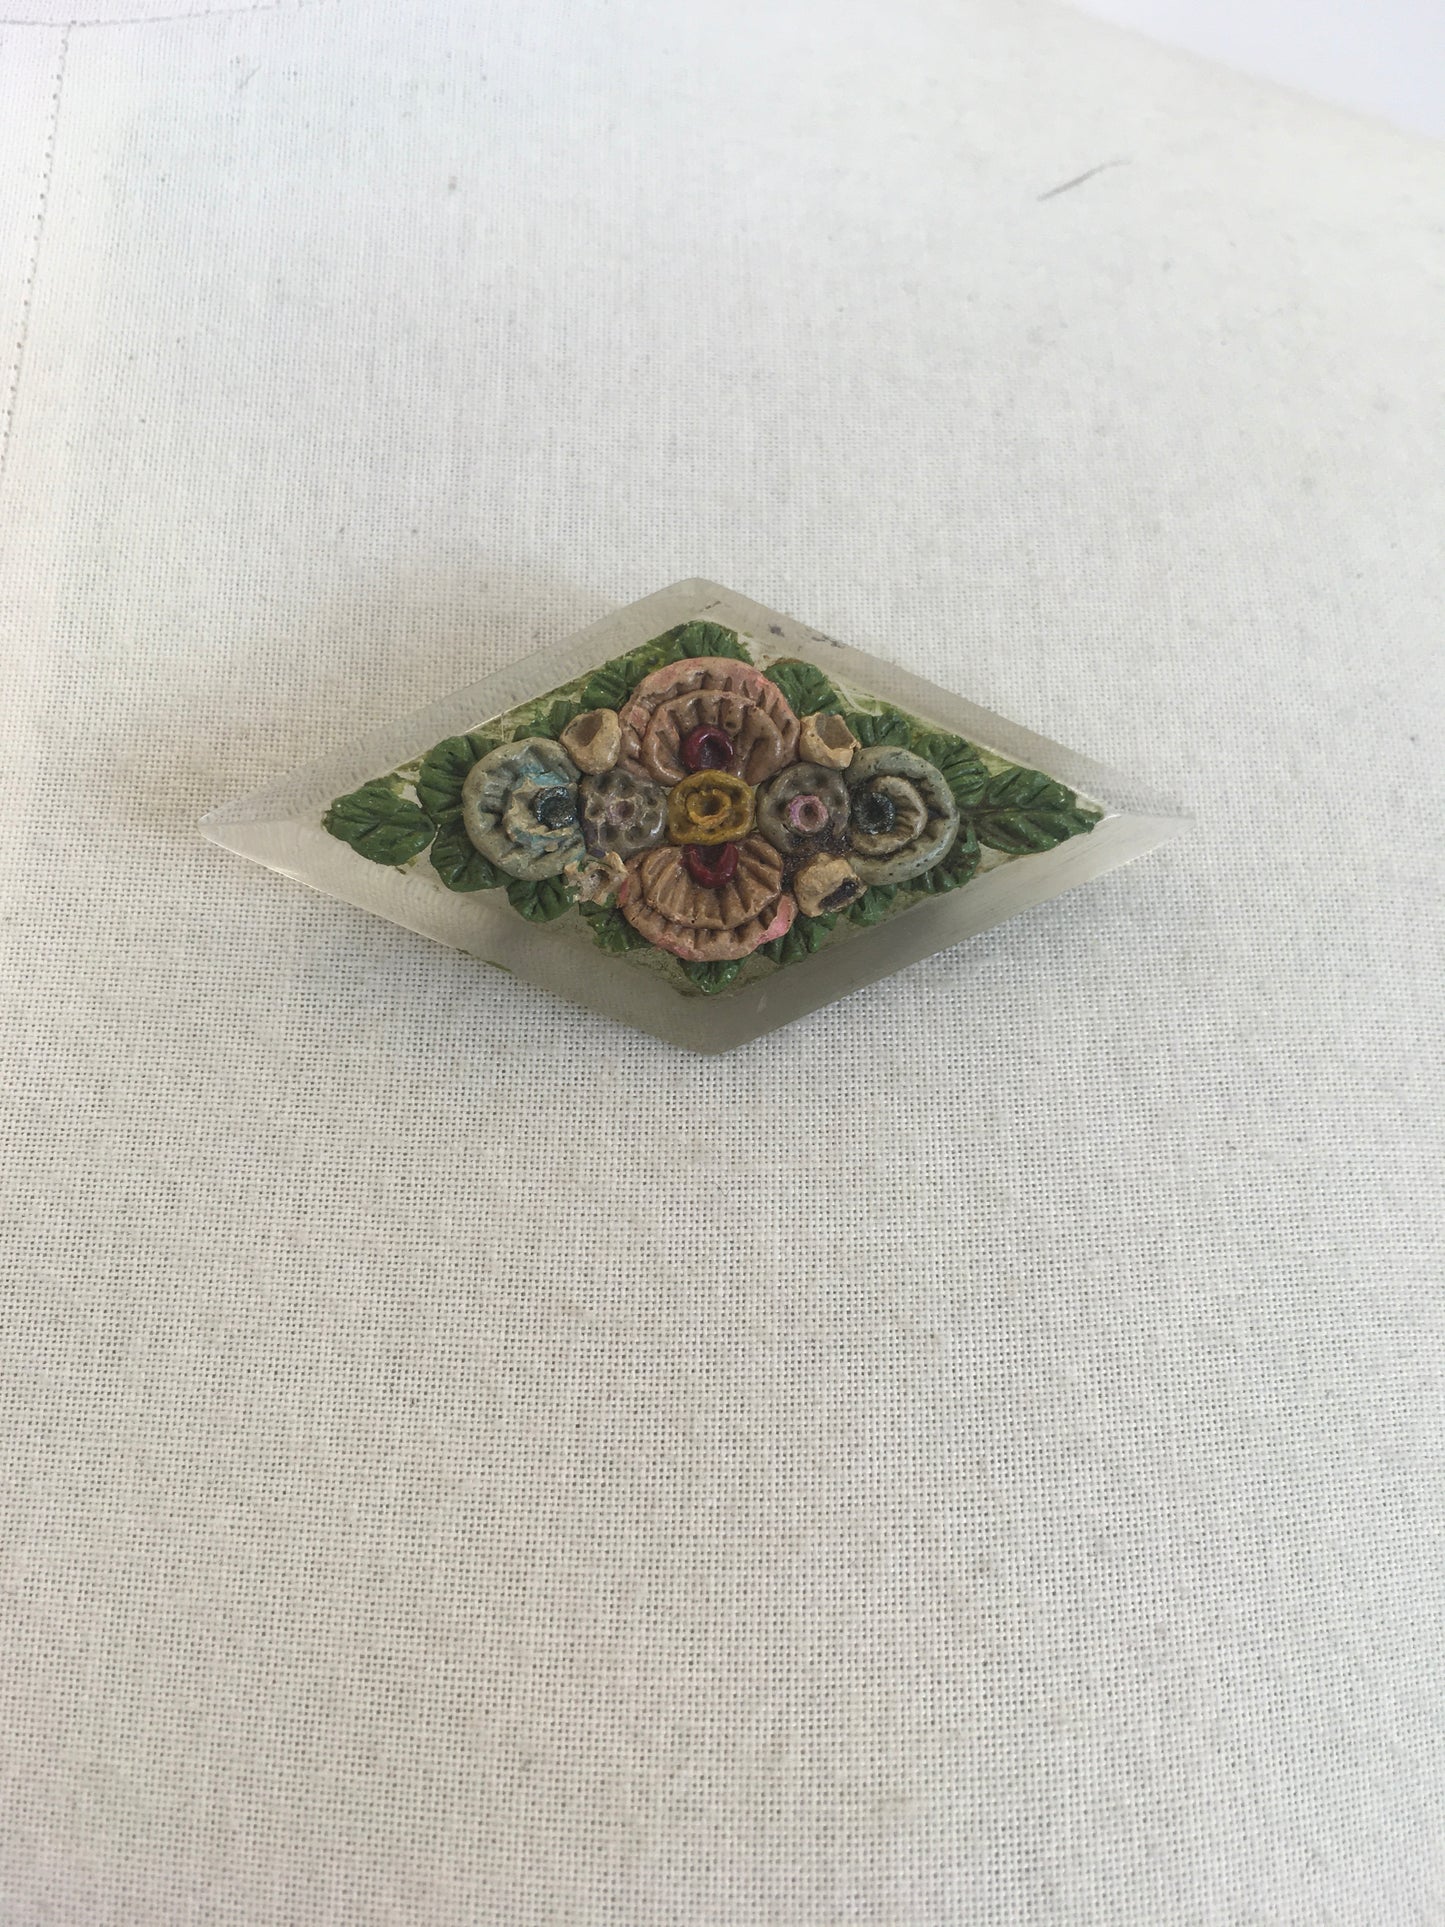 Original 1930’s Gorgeous Lucite Brooch - Embossed flowers